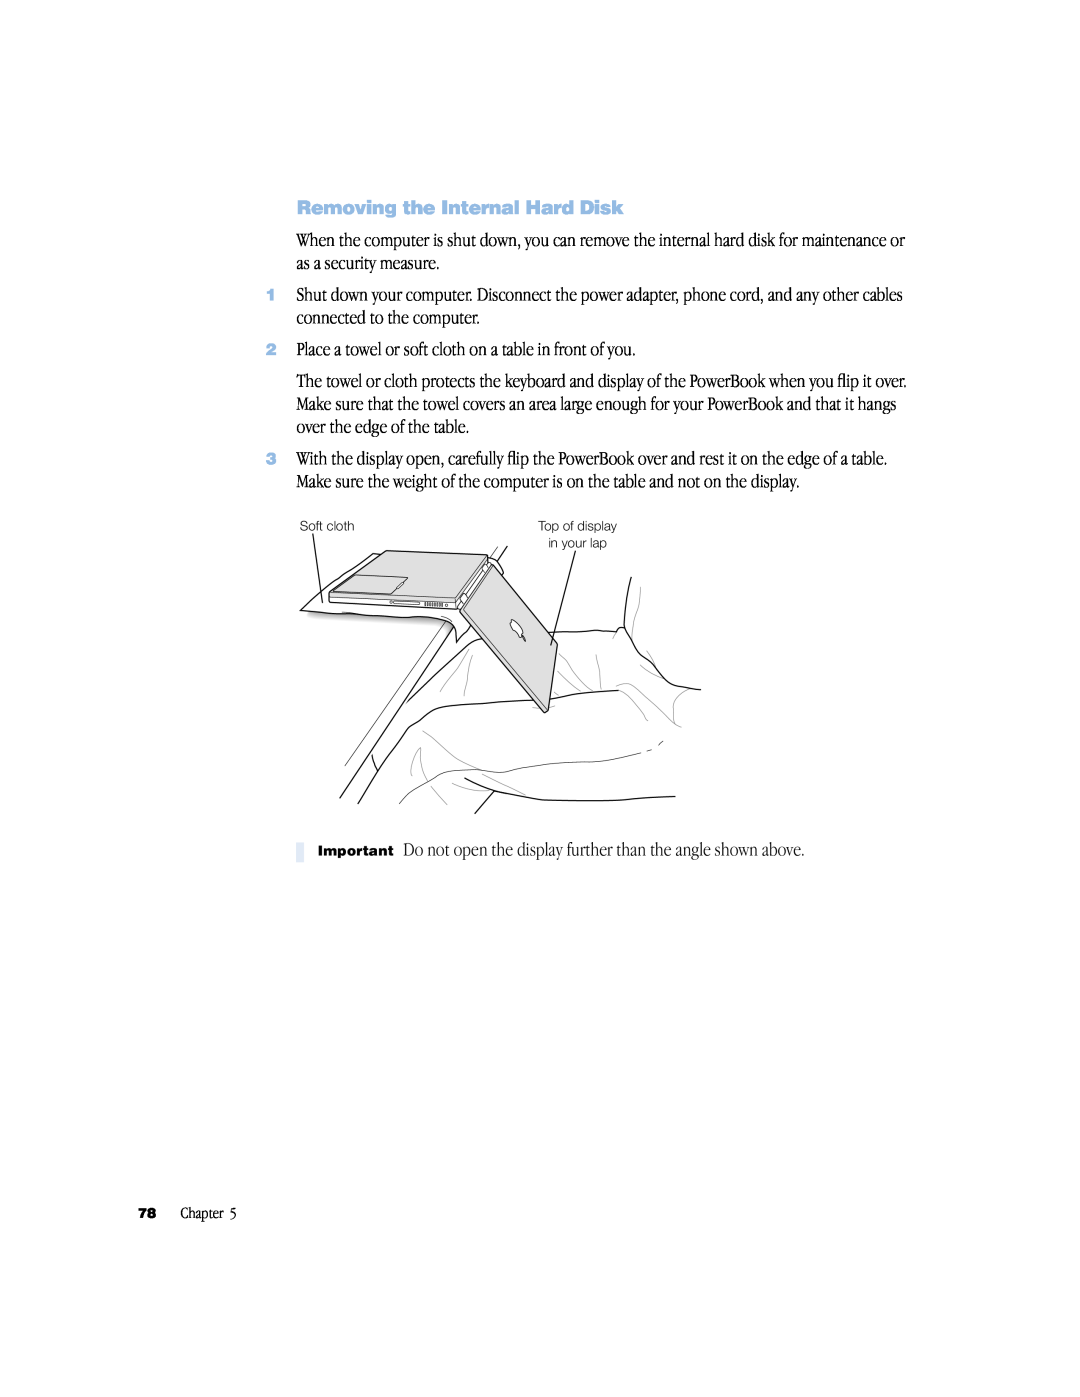 Apple powerbook g4 manual Removing the Internal Hard Disk, Chapter 